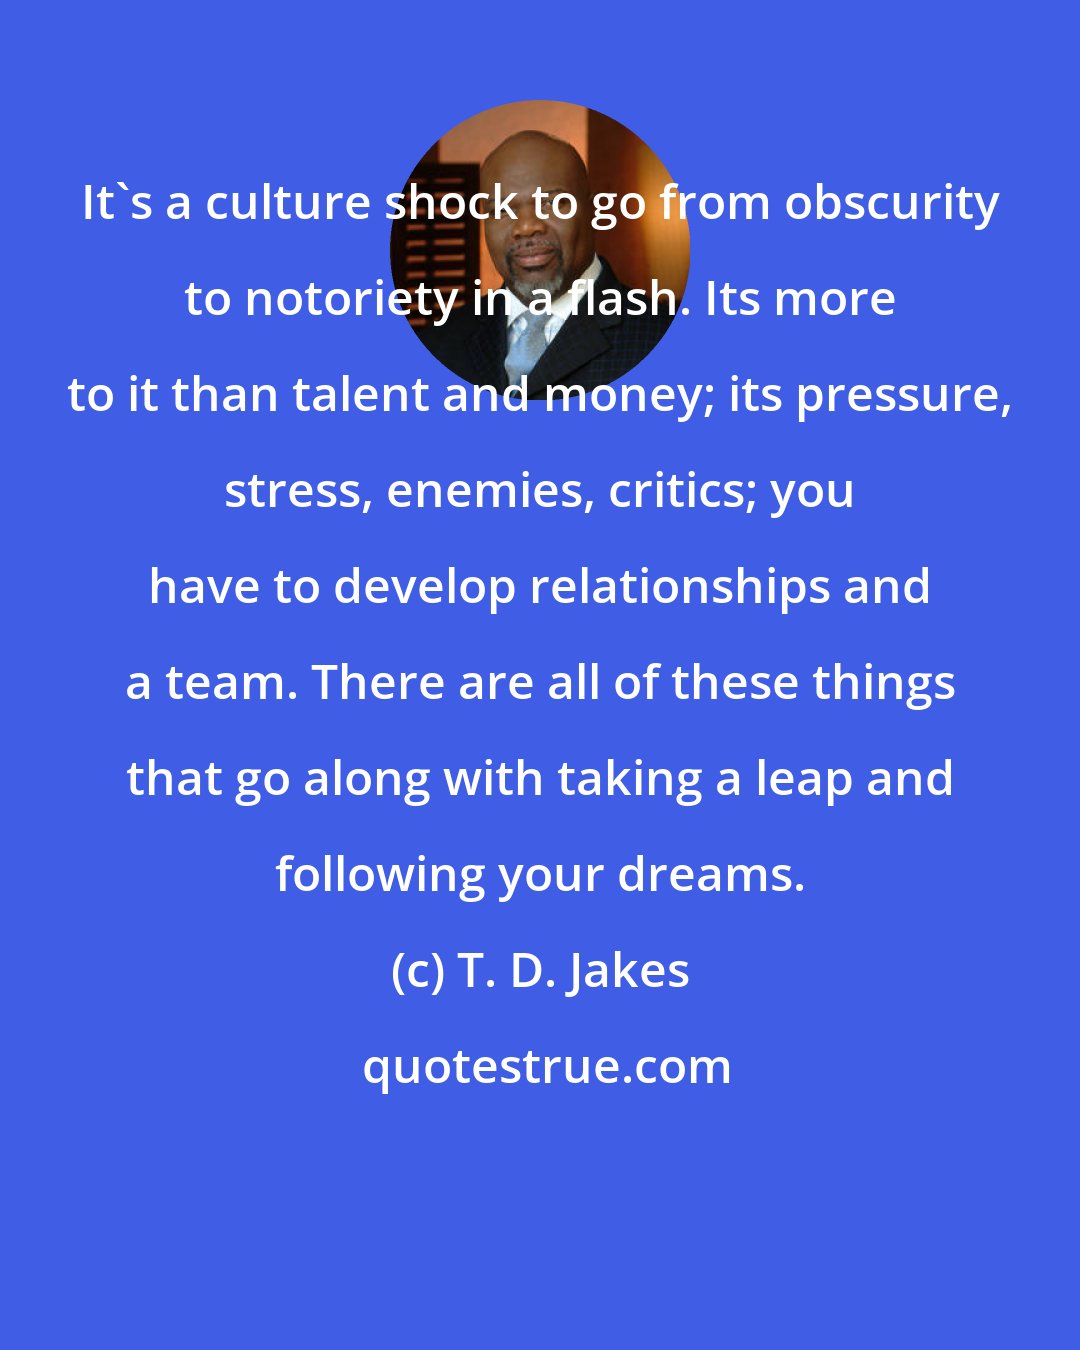 T. D. Jakes: It's a culture shock to go from obscurity to notoriety in a flash. Its more to it than talent and money; its pressure, stress, enemies, critics; you have to develop relationships and a team. There are all of these things that go along with taking a leap and following your dreams.